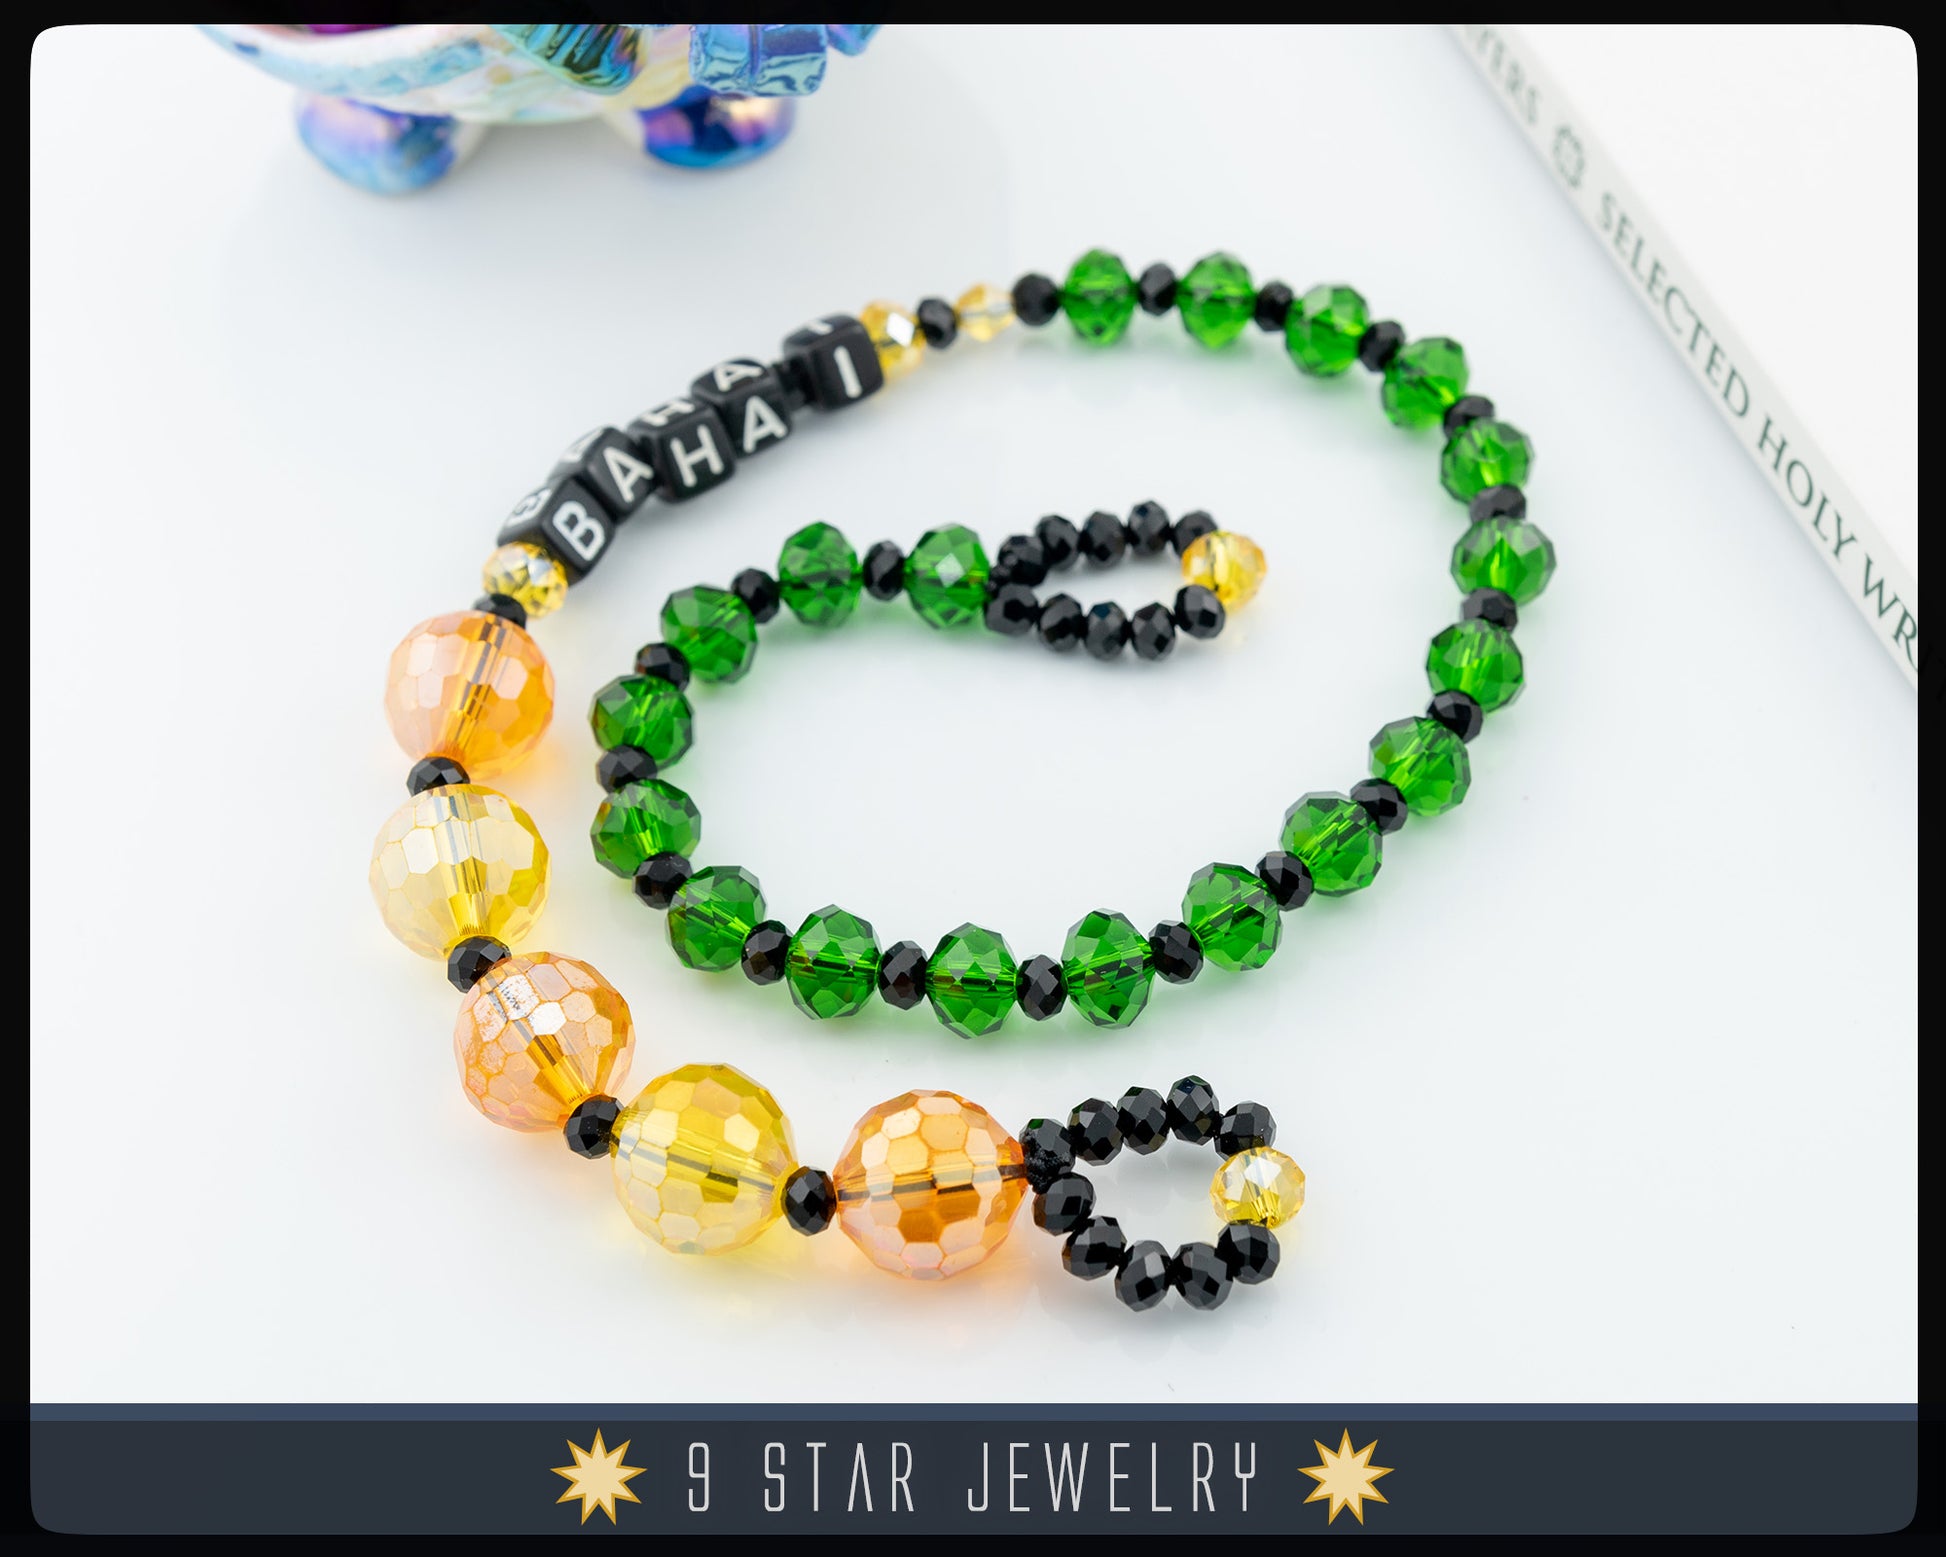 Orange Yellow and Green Glass Beads with Letters Baha'i Prayer Beads – 9  Star Jewelry